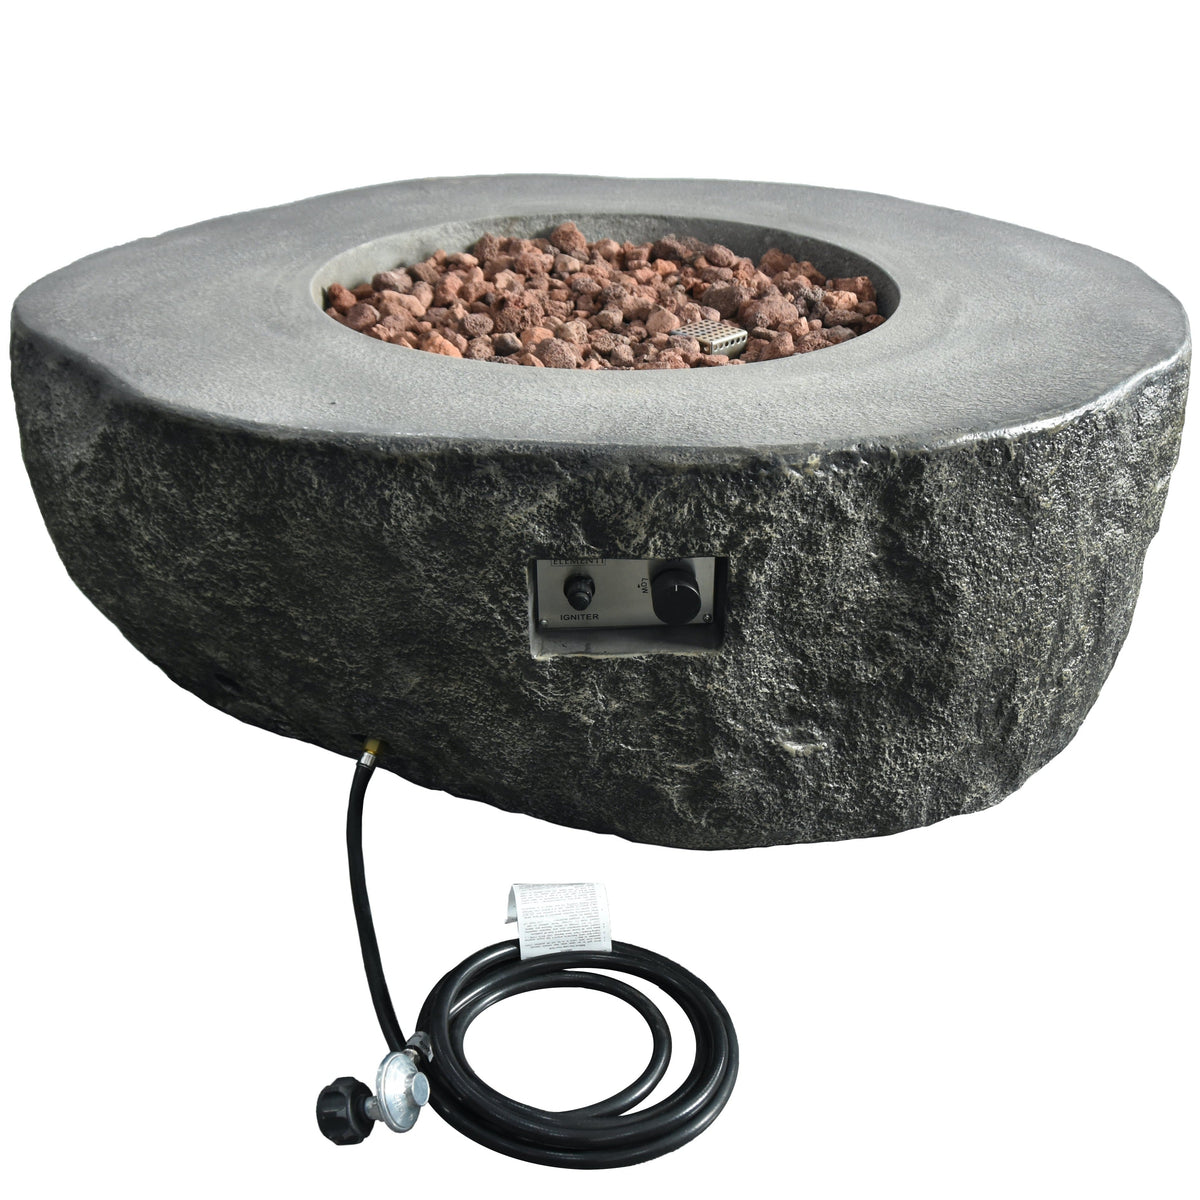 Elementi boulder fire pit table with gas hose